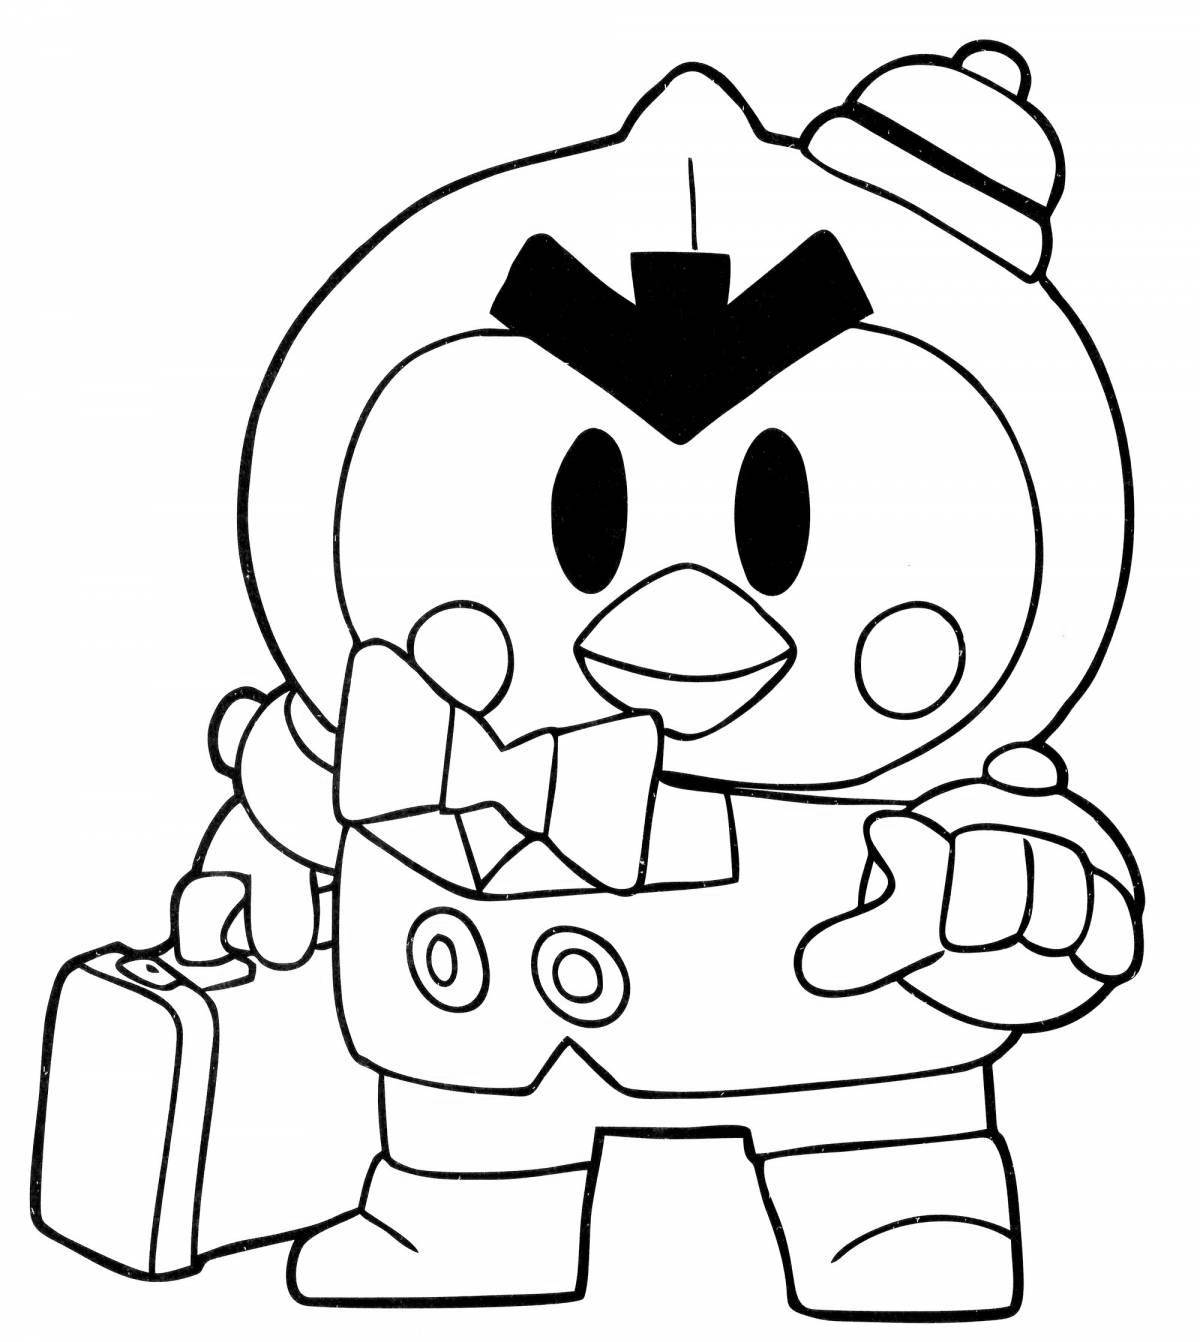 Complex coloring pages brawl stars pins